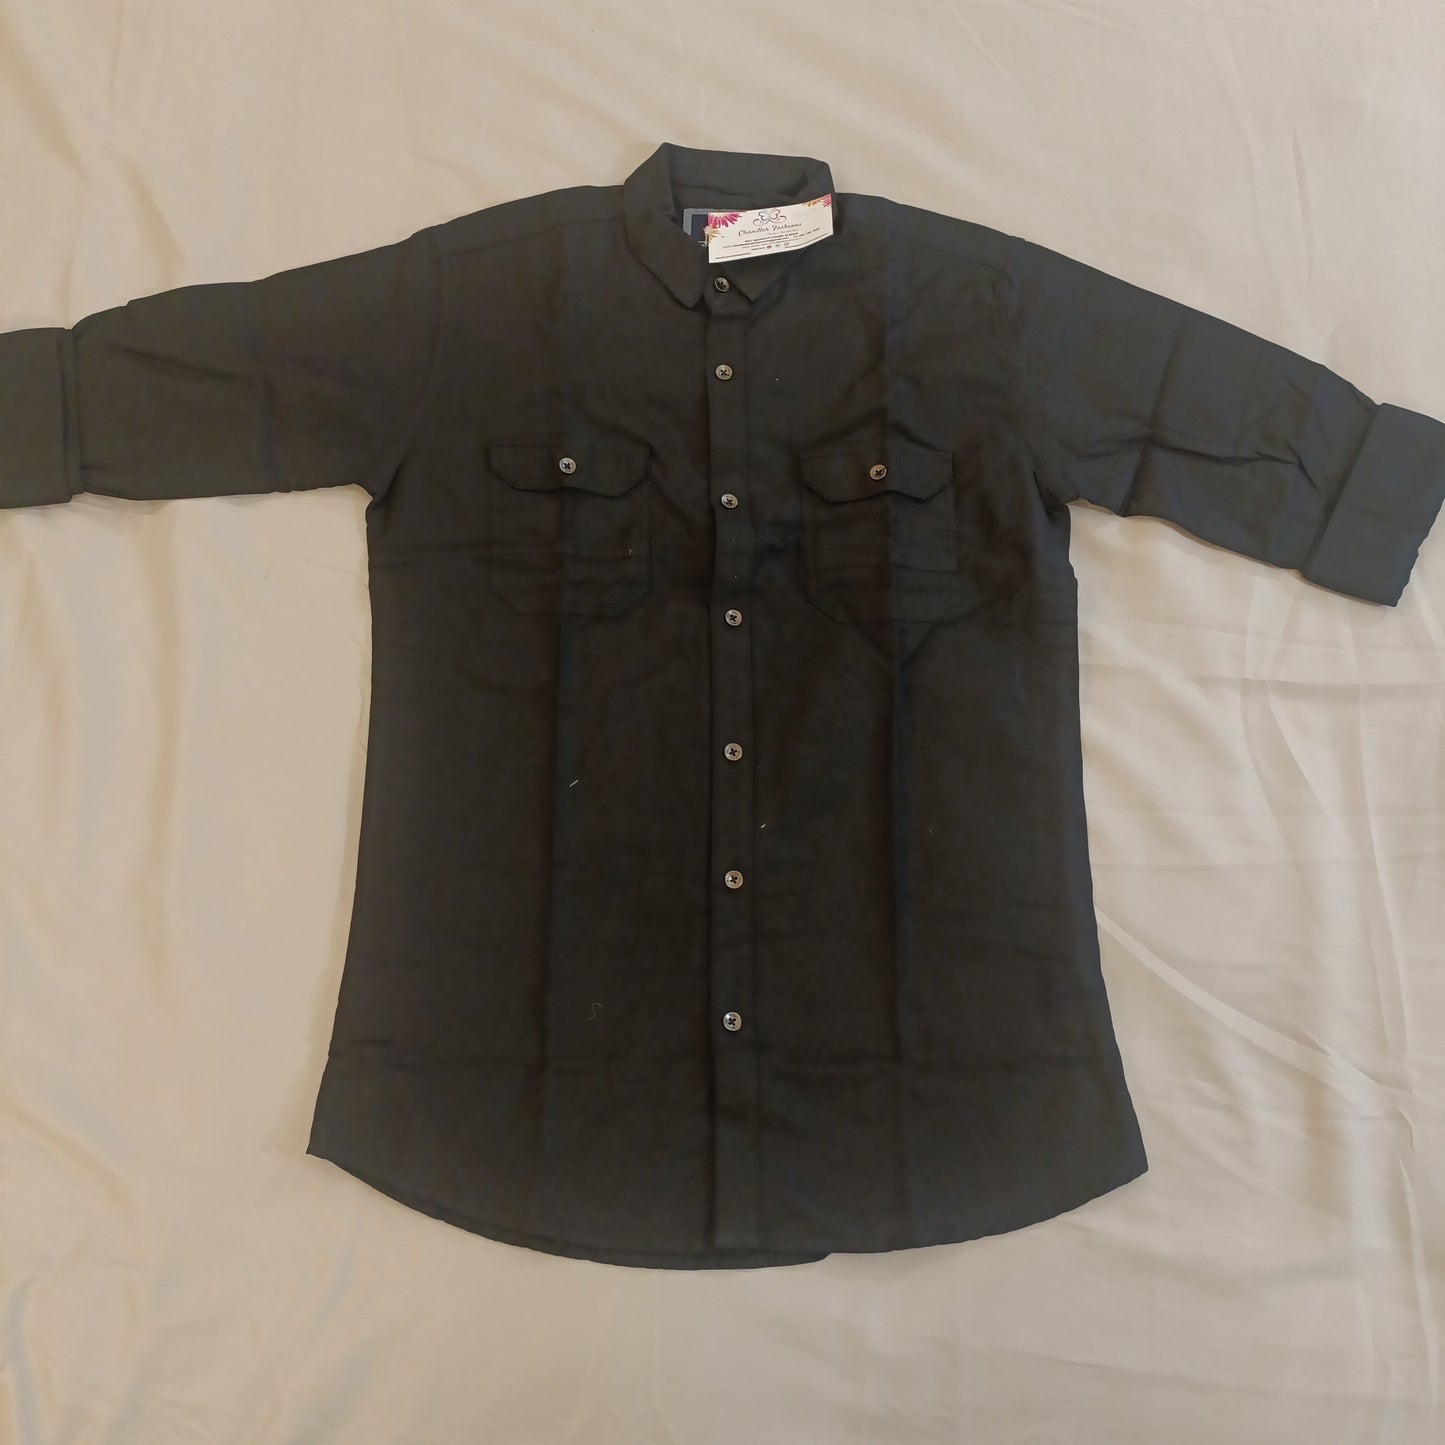 Attractive Black Shirt With Folded Sleeves And Two Pockets